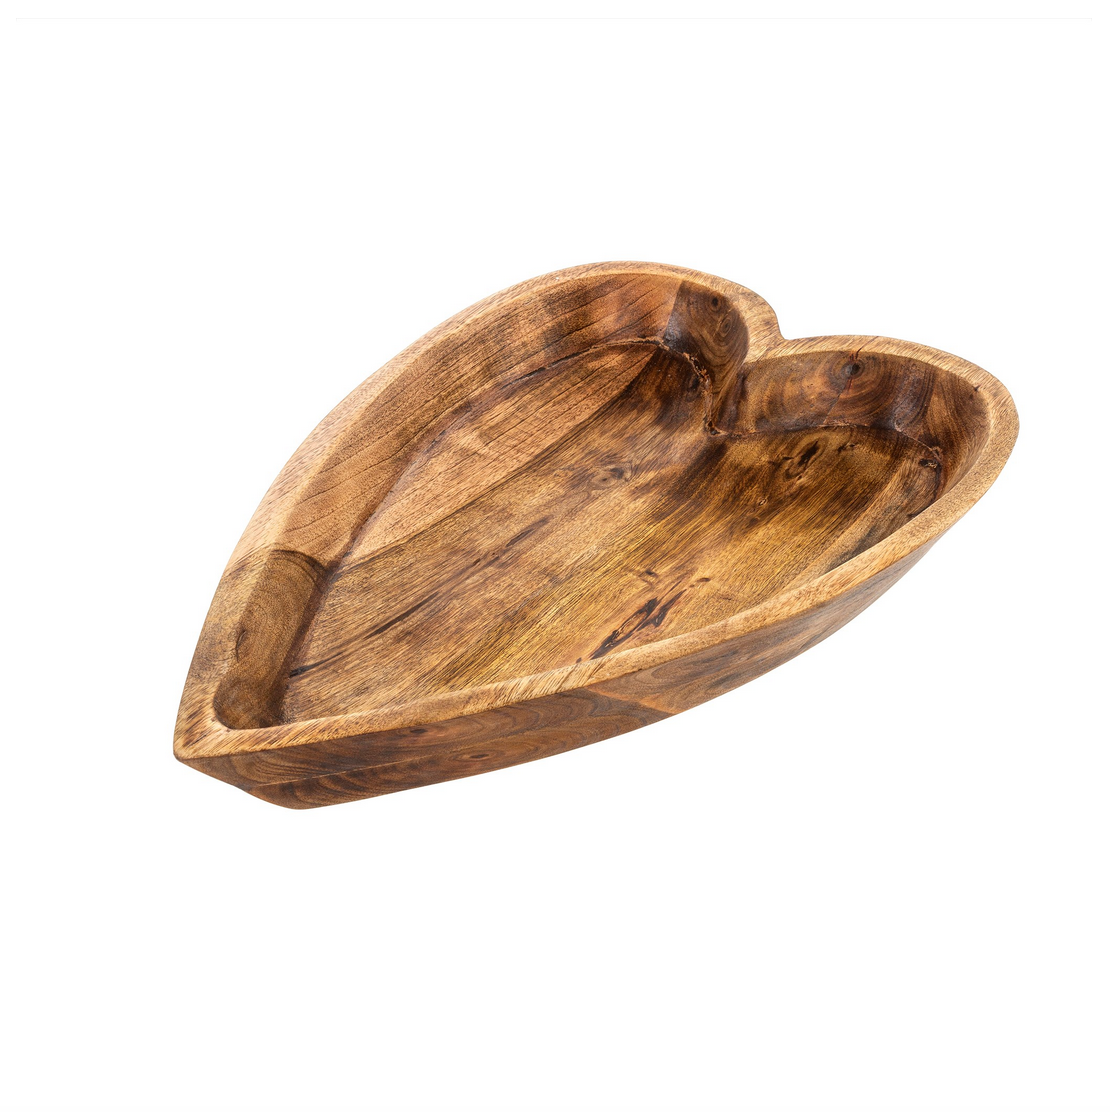 Load image into Gallery viewer, CARVED HEART BOWL
